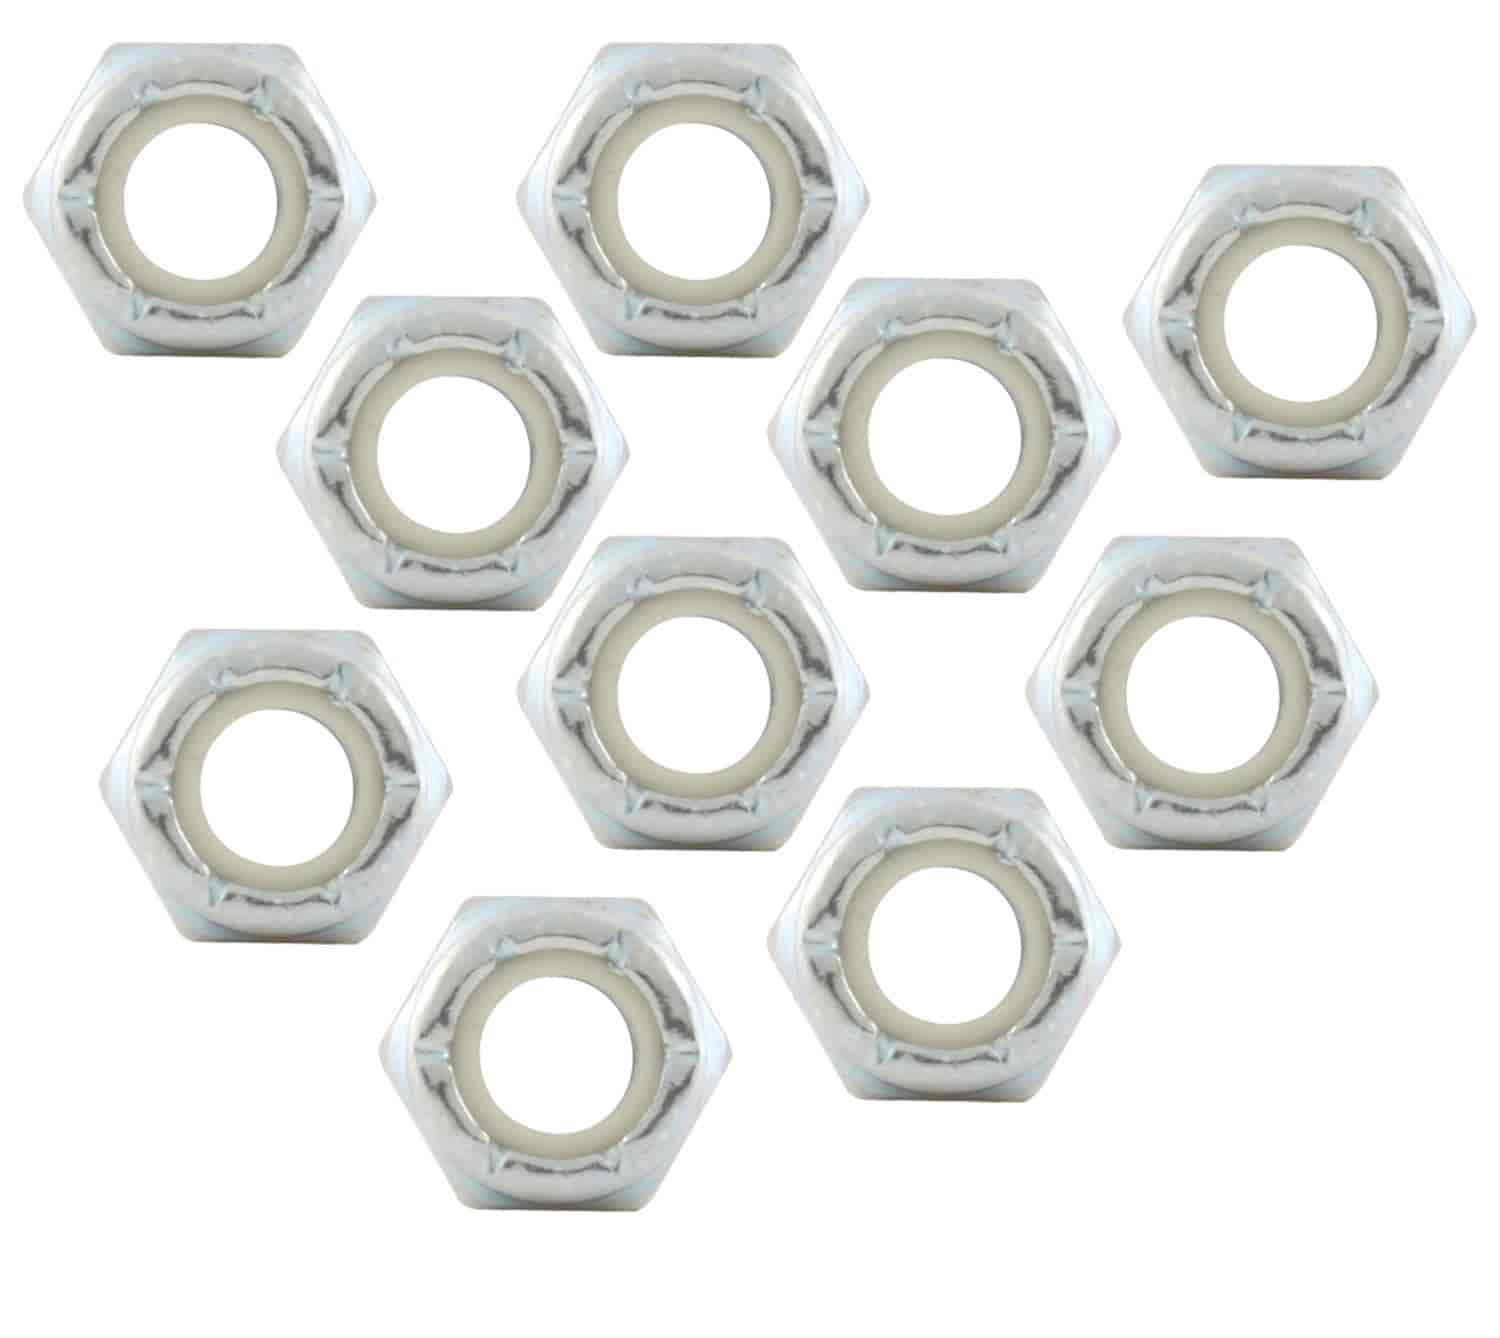 Fine Thread Hex Nuts With Nylon Inserts 1/4"-28